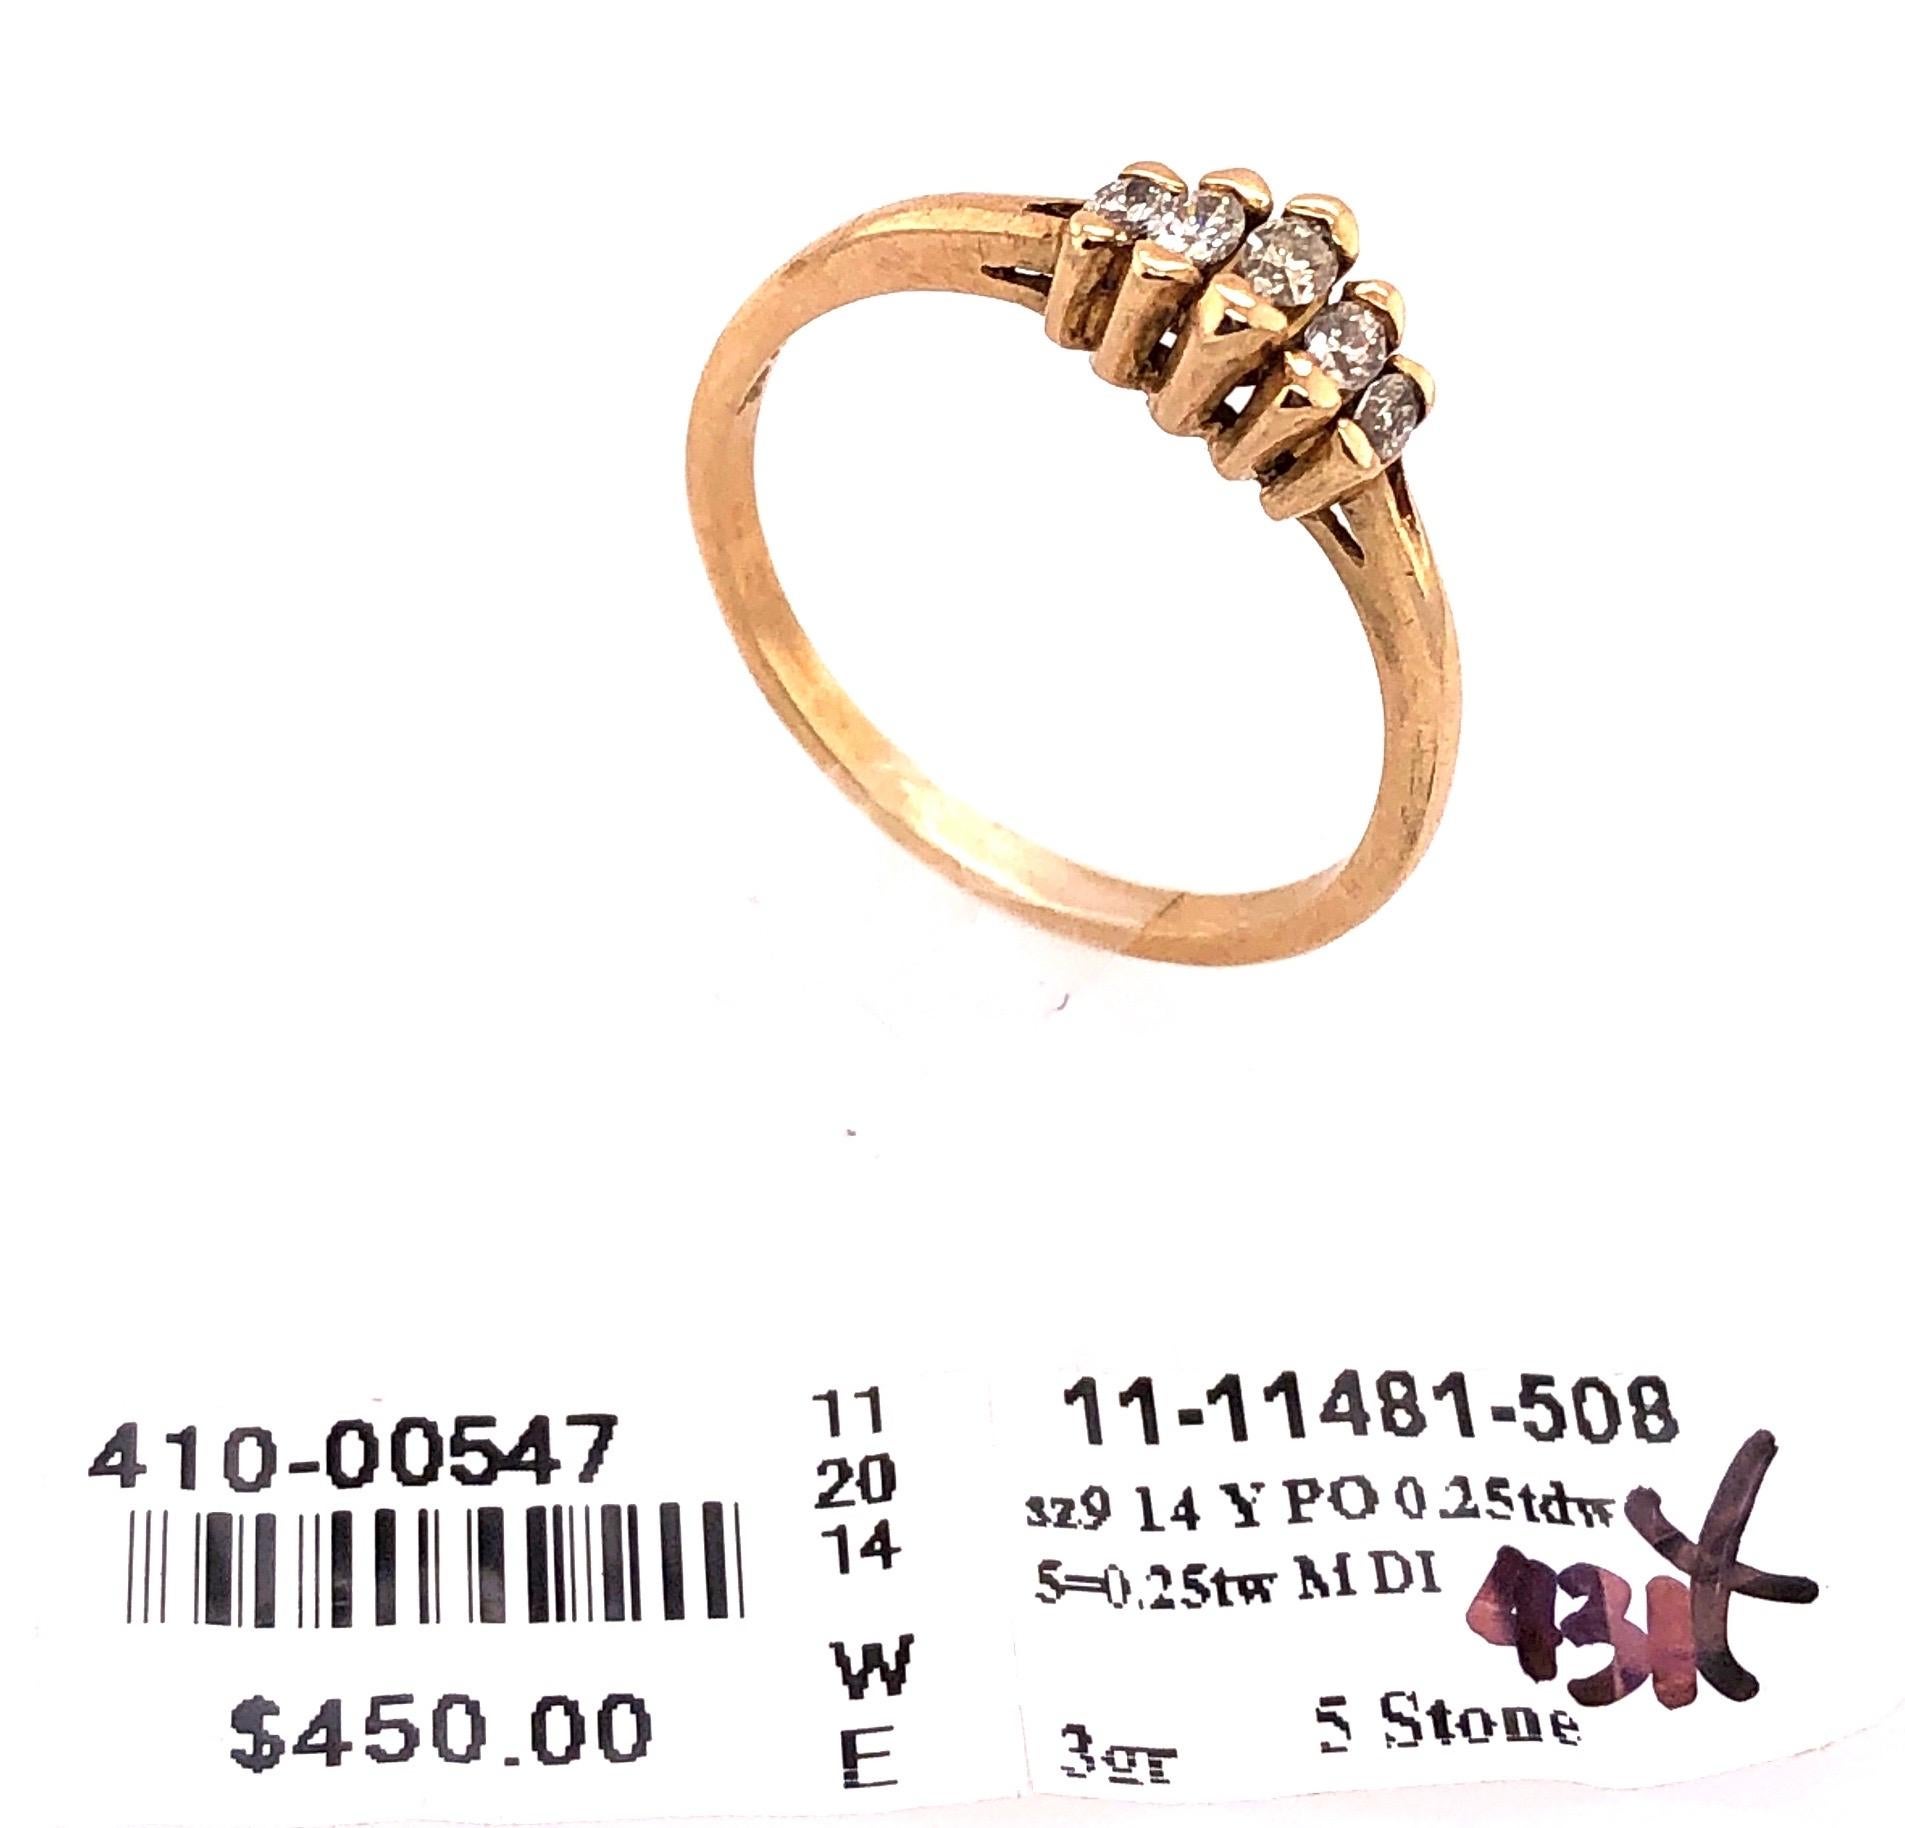 14 Karat Yellow Gold Diamond Ring with Five Stones 0.25 TDW For Sale 7